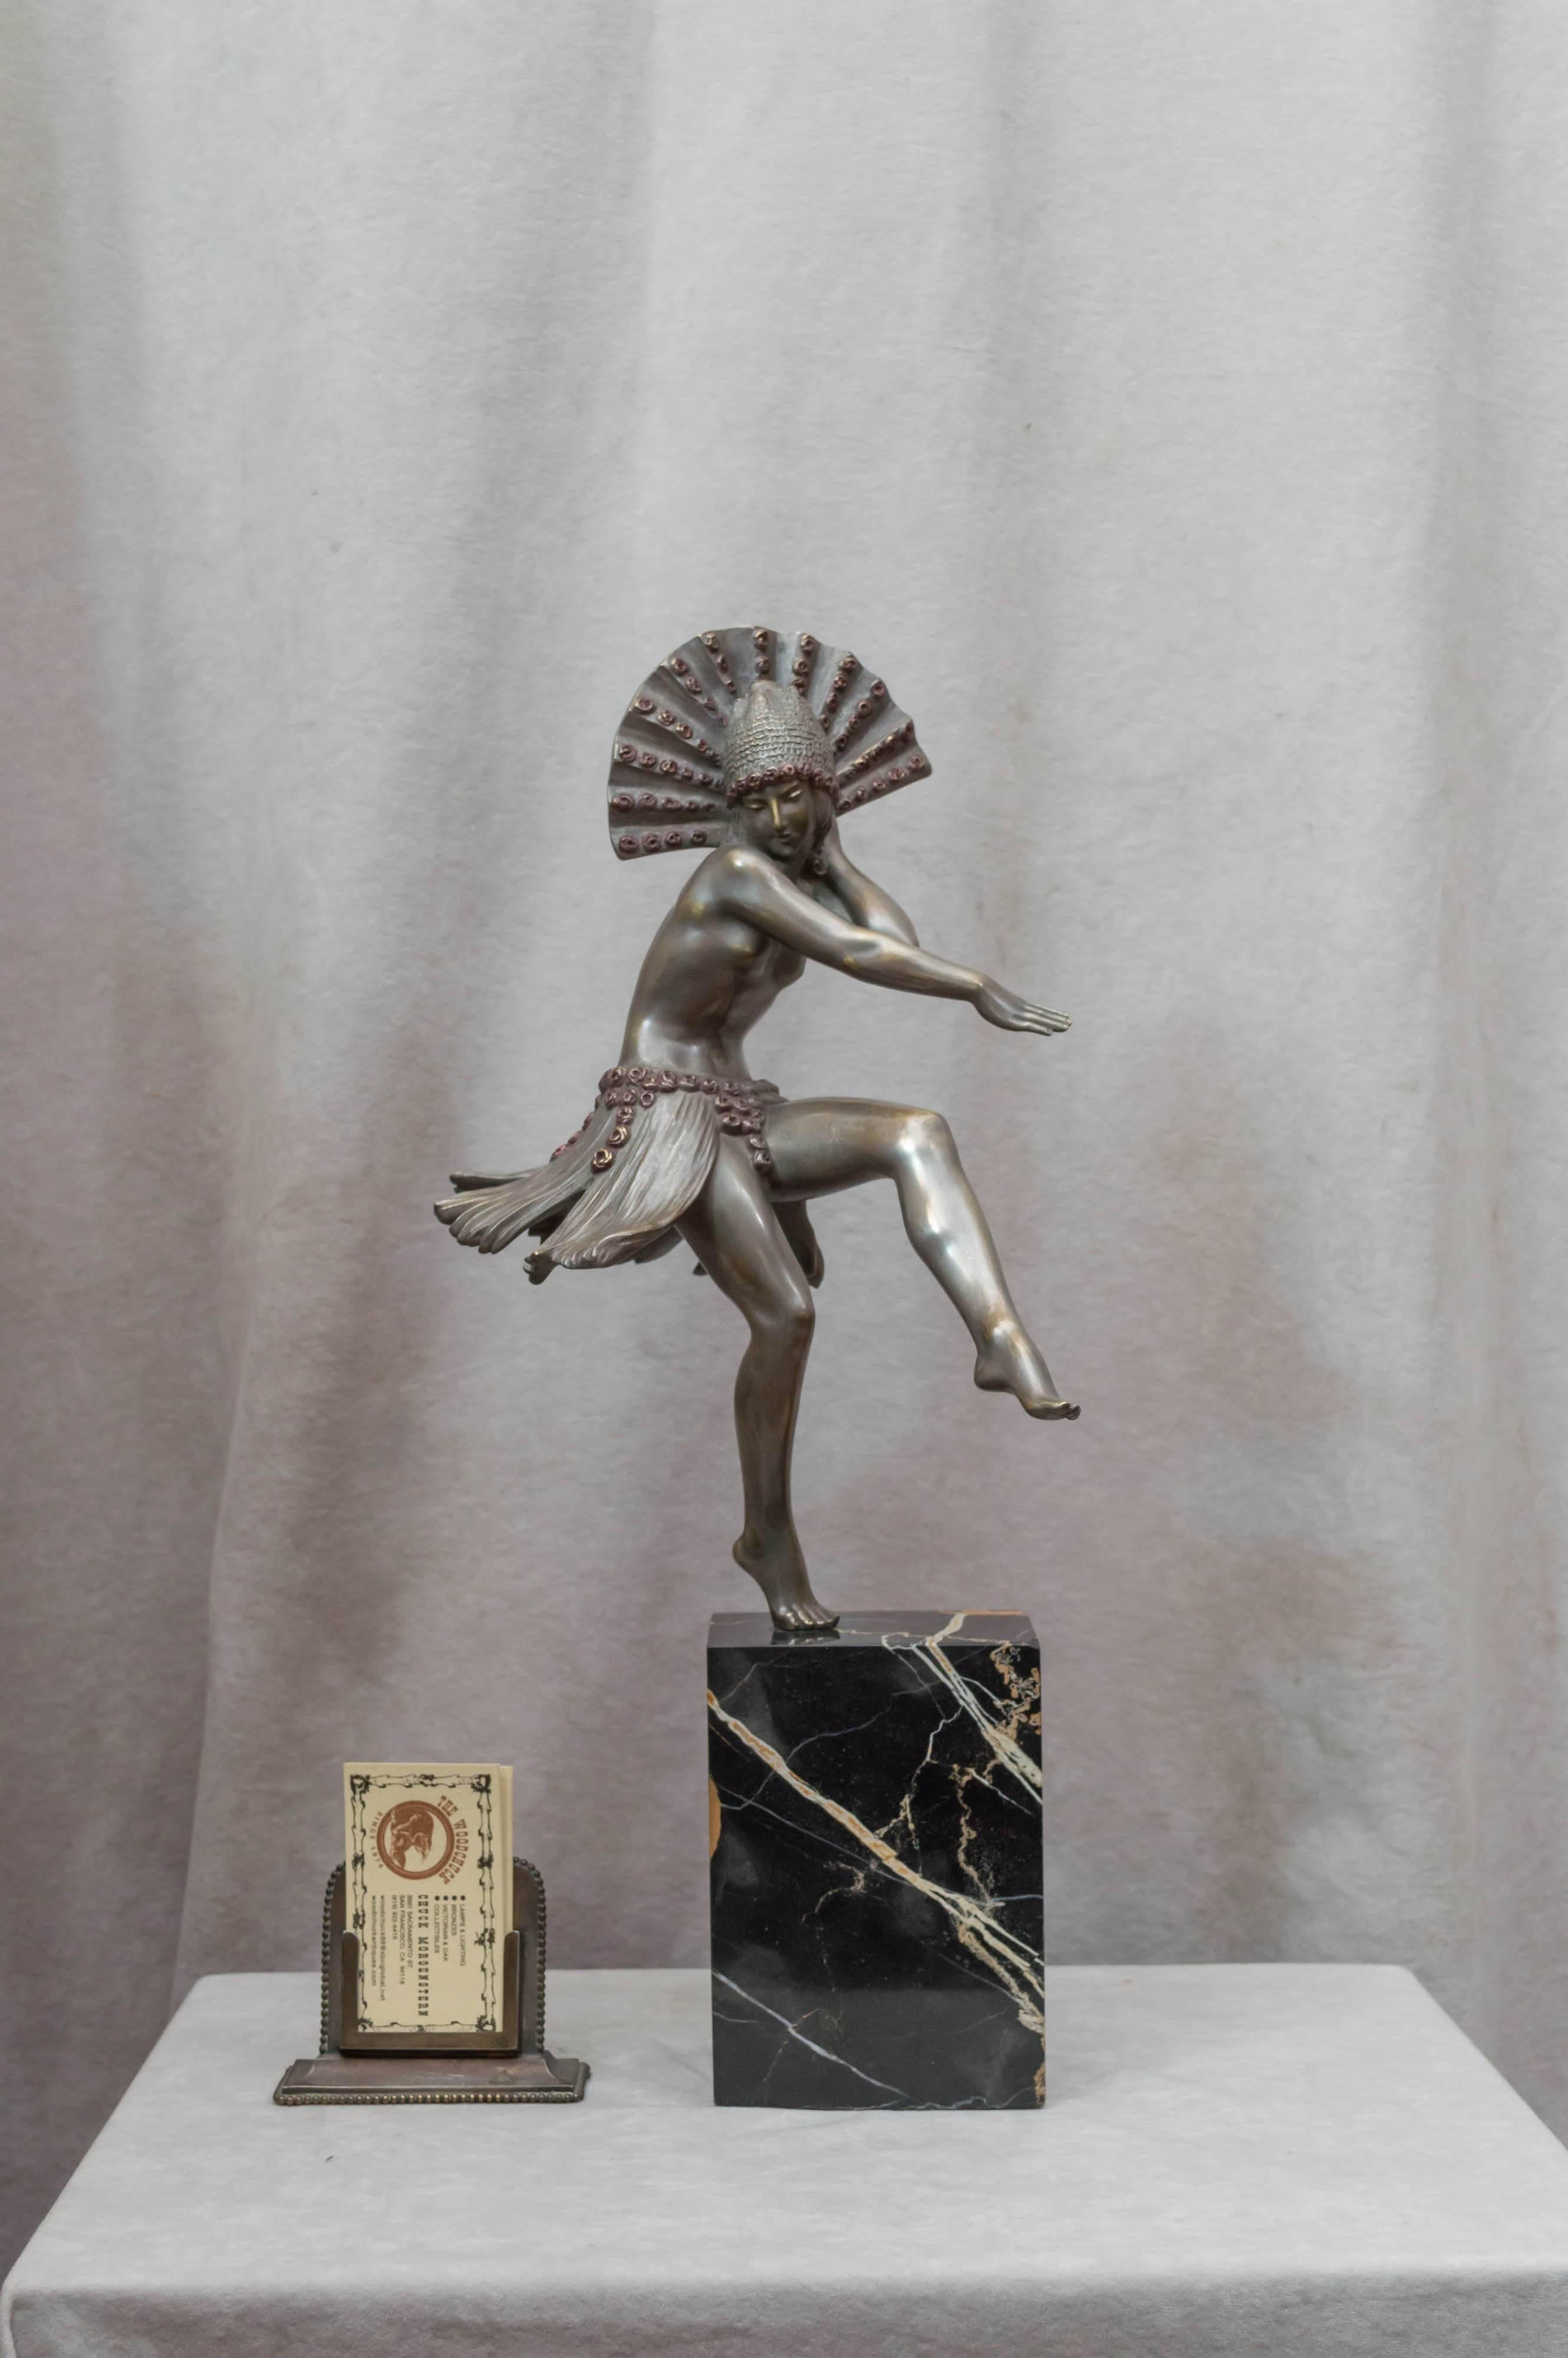 This graceful dancer is artist signed and was done by Fanny Rozet. Ms. Rozet 1881-1958 was born in Paris, winning a medal in 1921. Silvered and polychrome finish bring this sculpture to life. A very high quality Art Deco bronze.